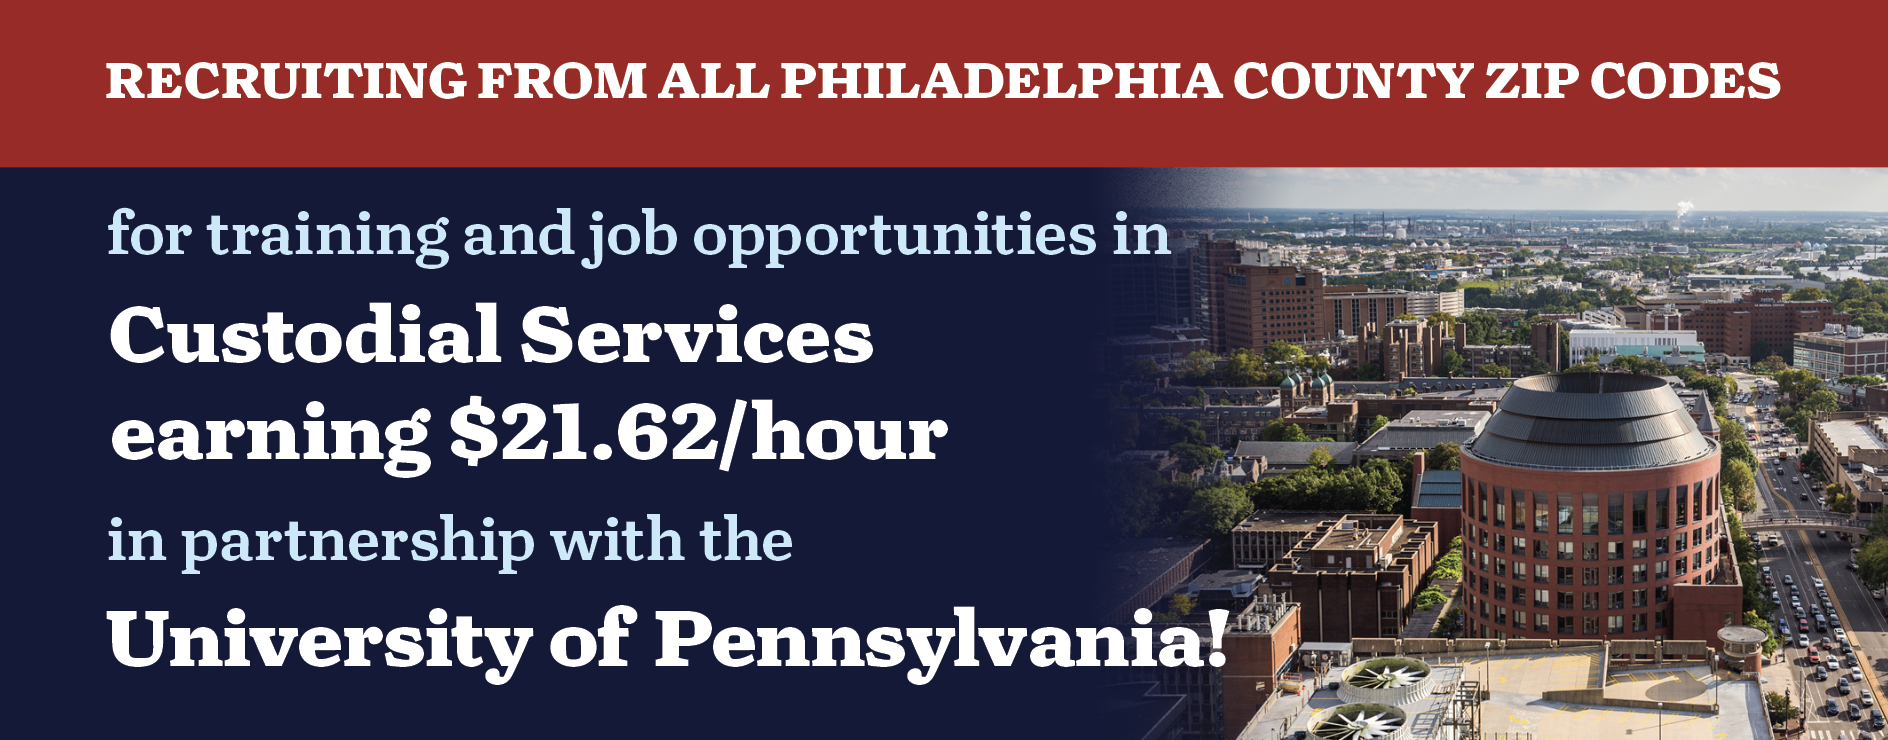 RECRUITING FROM ALL PHILADELPHIA COUNTY ZIP CODES for training and job opportunities in Custodial Services earning $21.62/hour in partnership with the University of Pennsylvania!